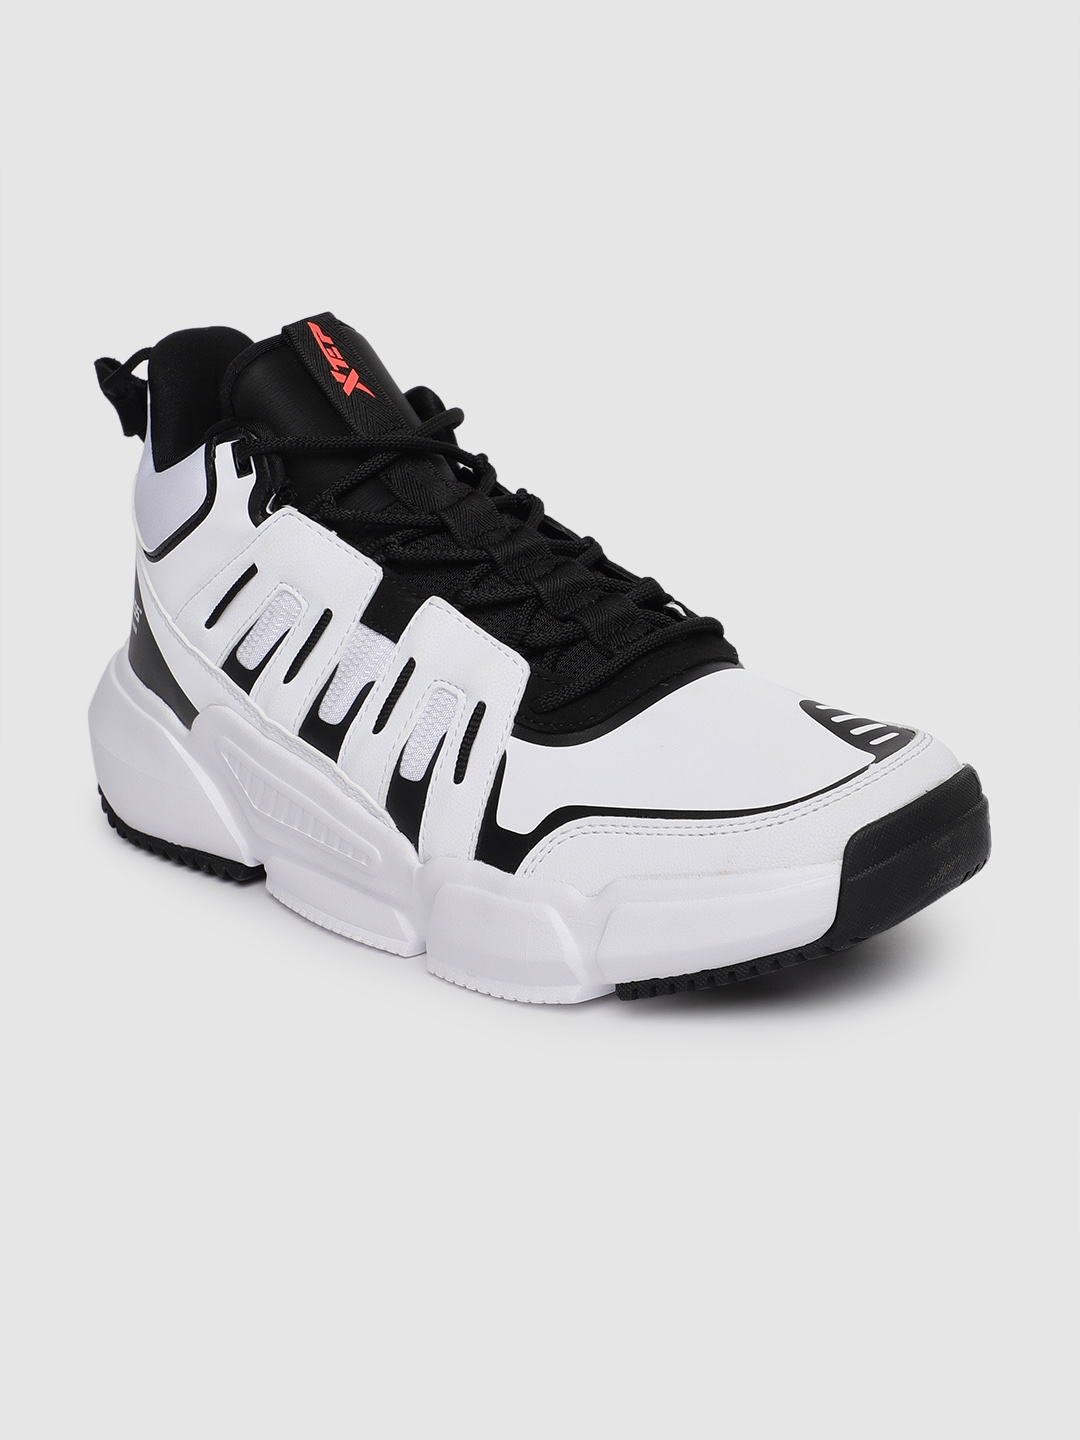 Buy Xtep Men White Basketball Shoes - Sports Shoes for Men 11504208 ...